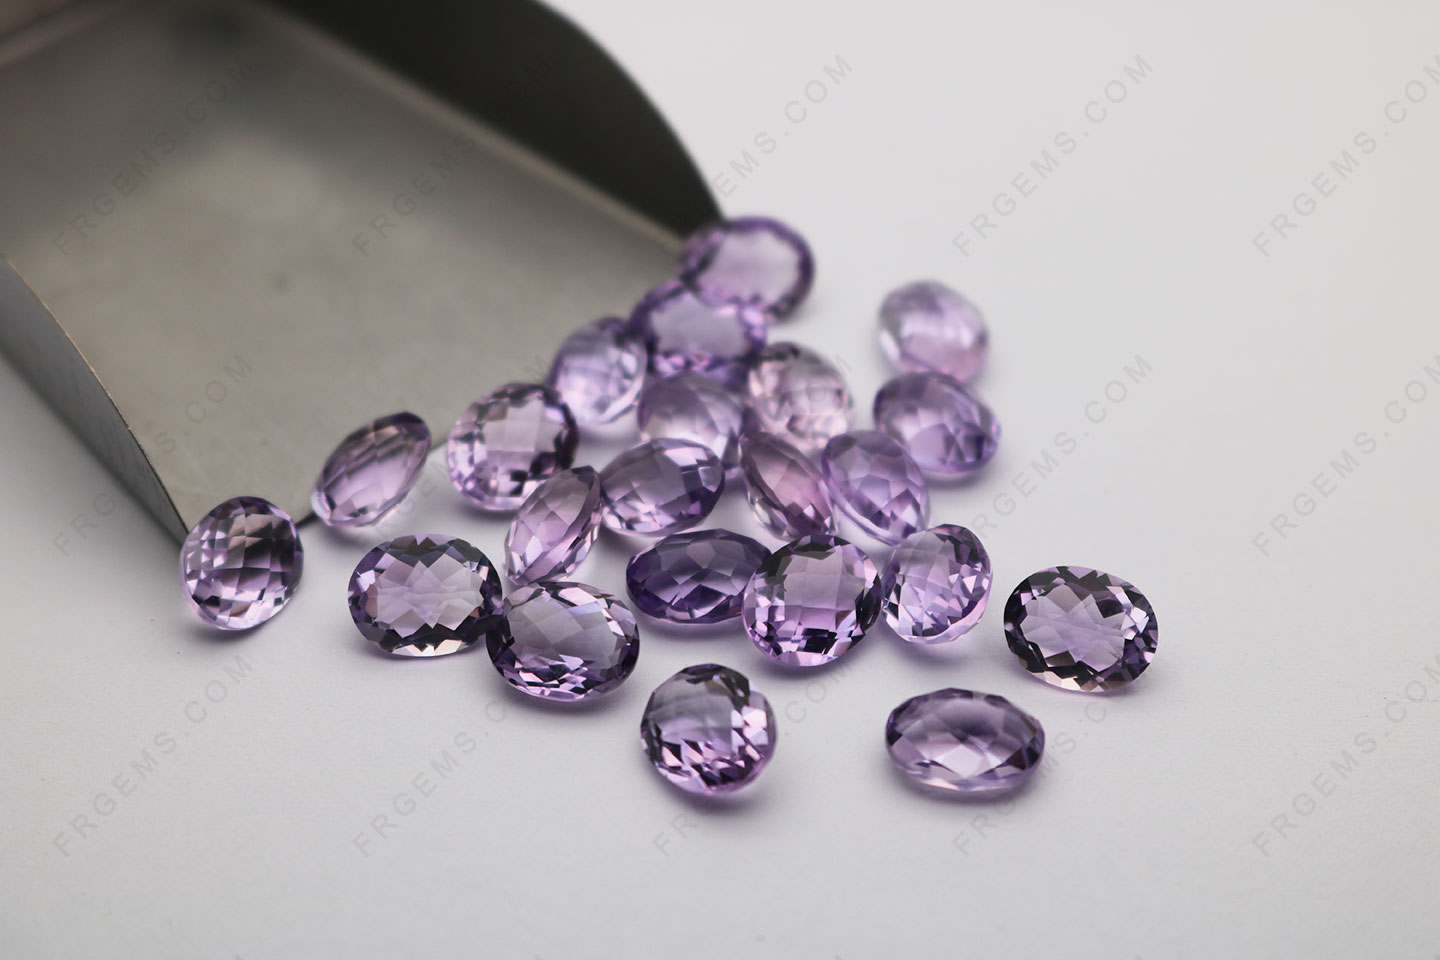 New AAA+ Quality Purple Lilac Stone Natural Stone Round Loose